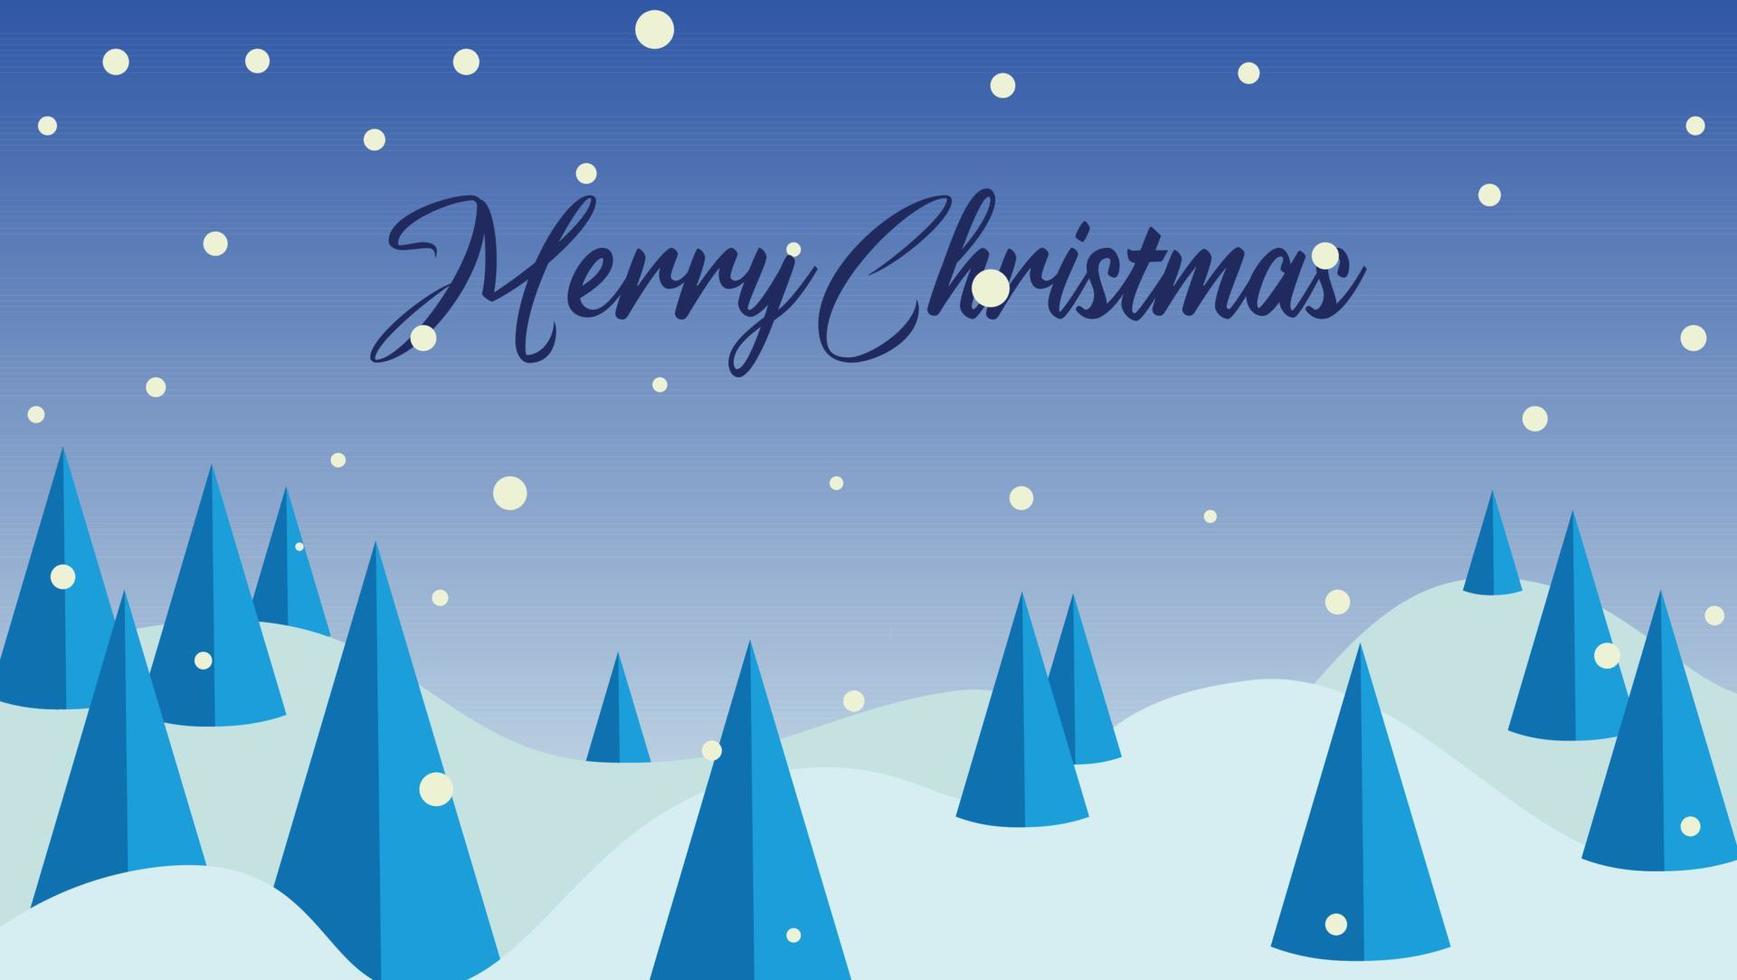 Illustration background Christmas day vector